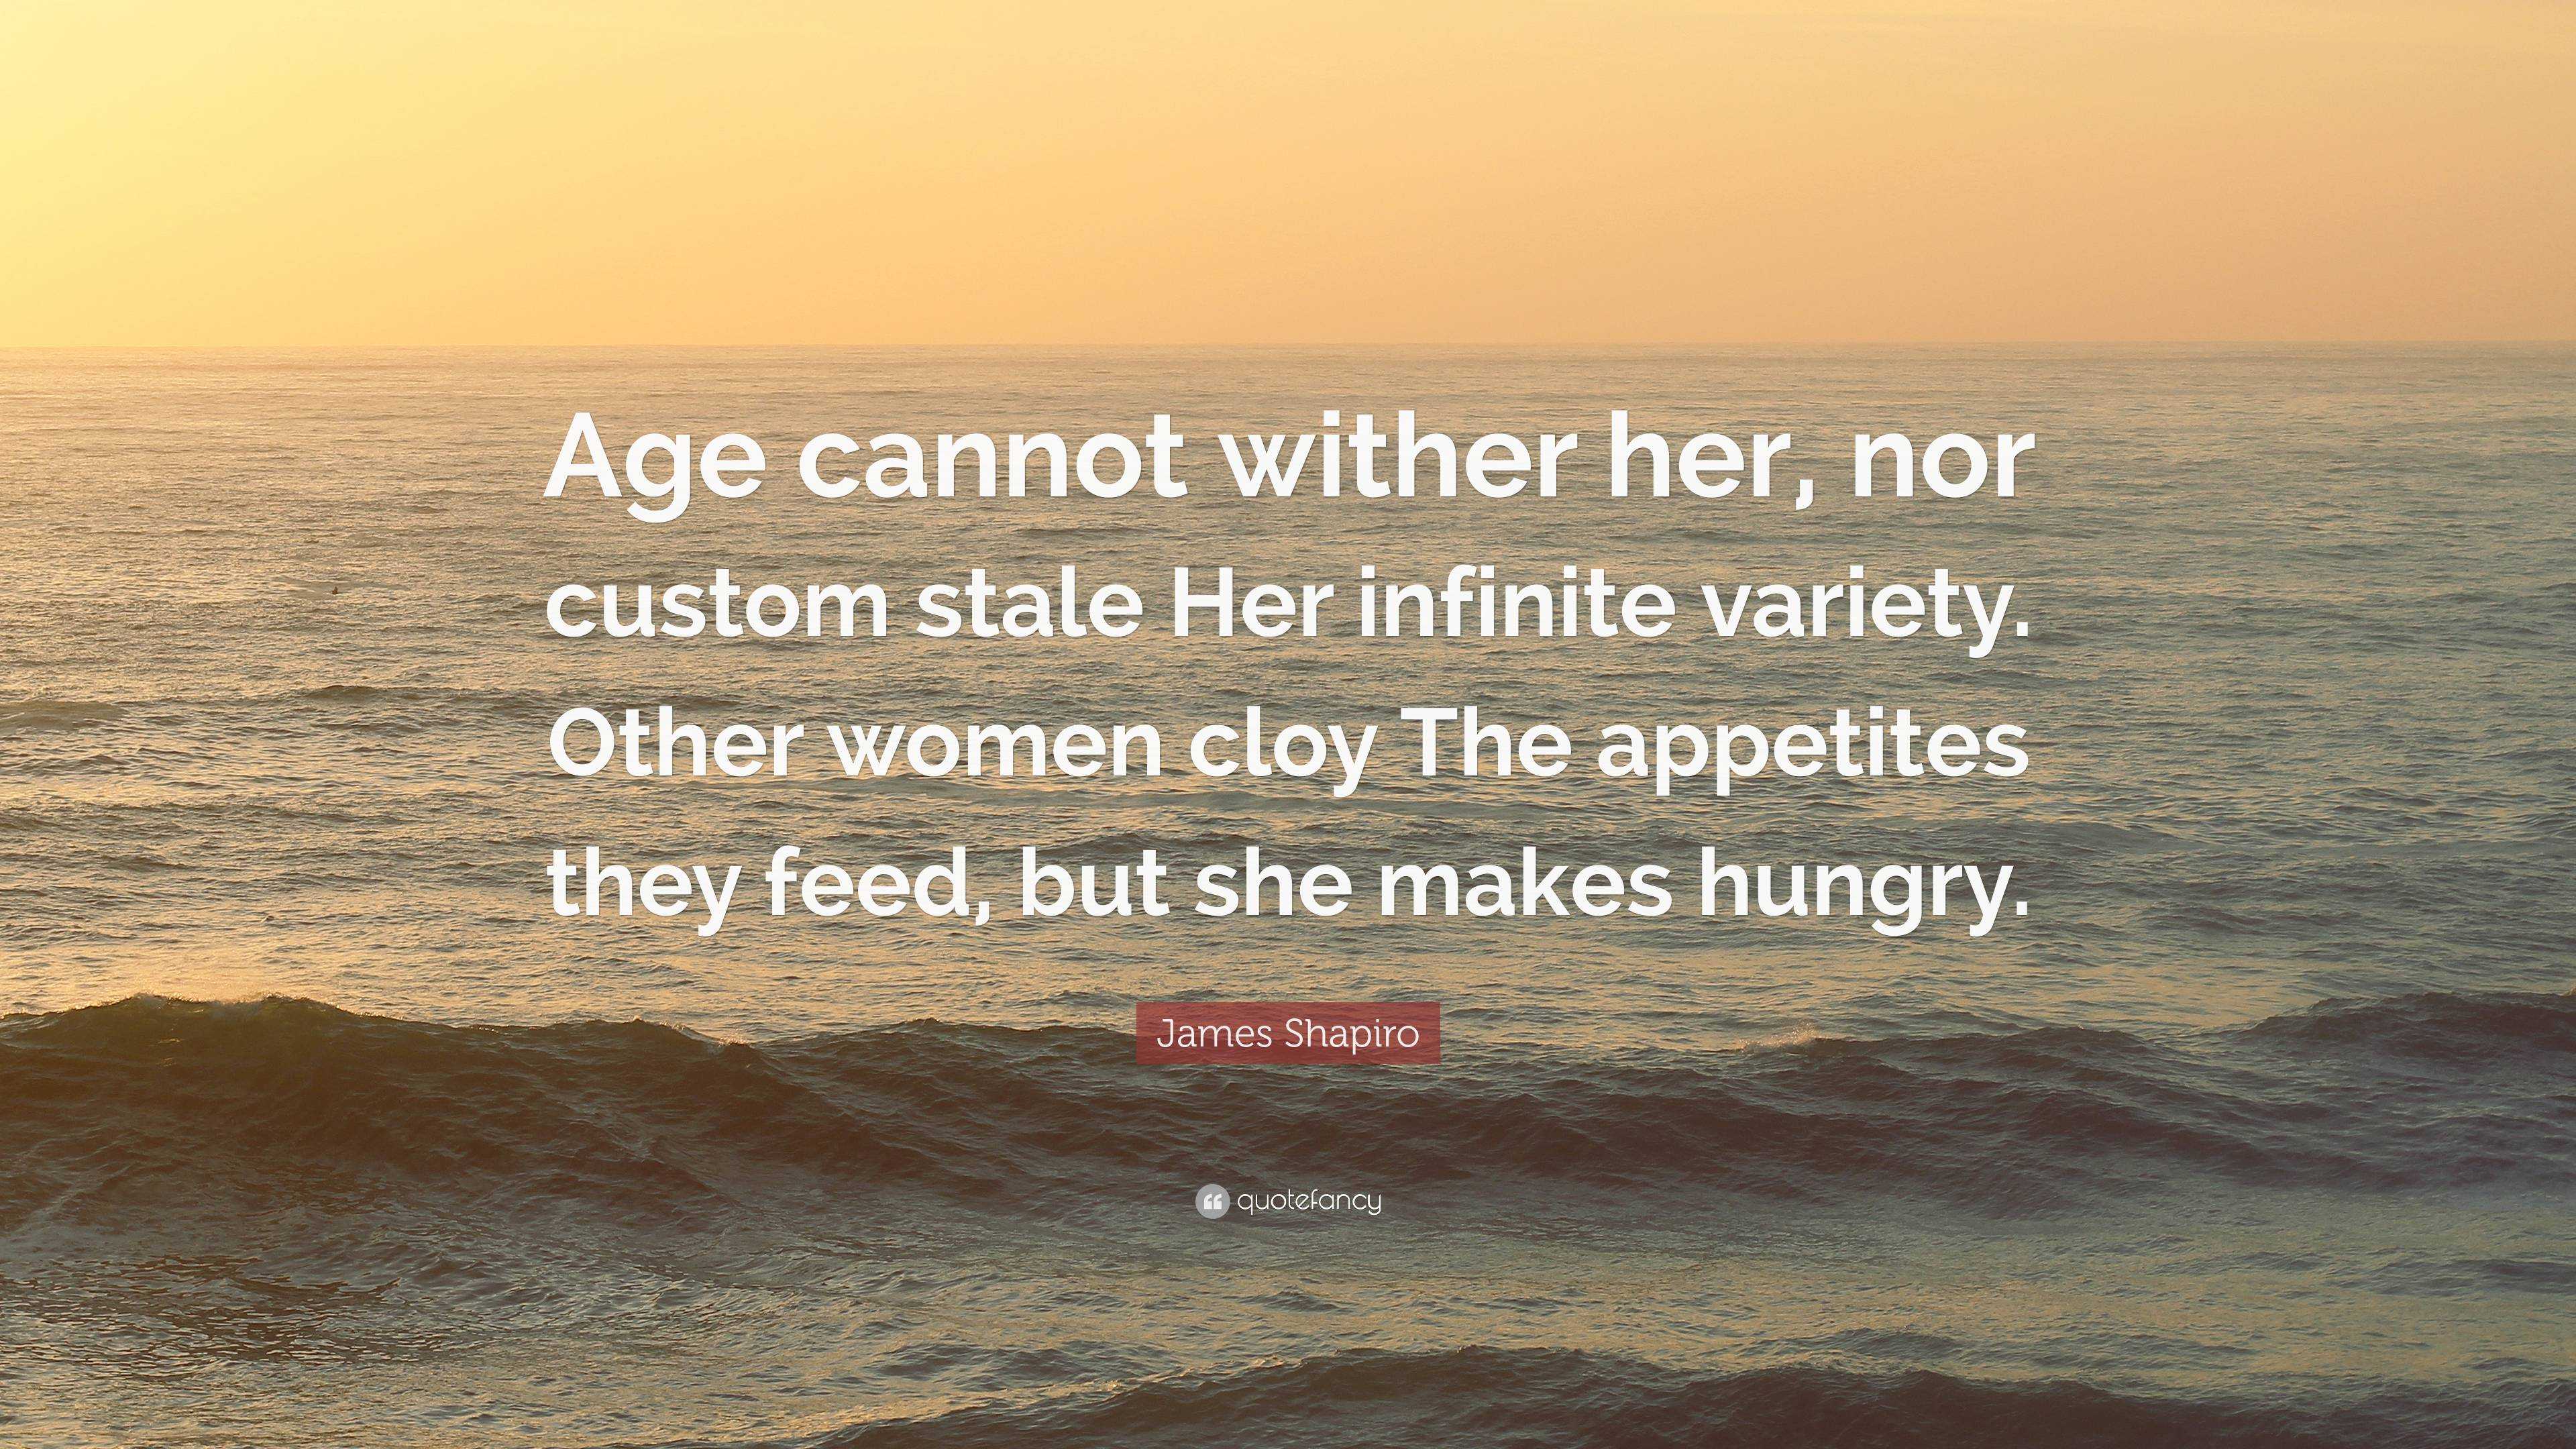 James Shapiro Quote: “Age Cannot Wither Her, Nor Custom Stale Her Infinite Variety. Other Women Cloy The Appetites They Feed, But She Makes Hu...”